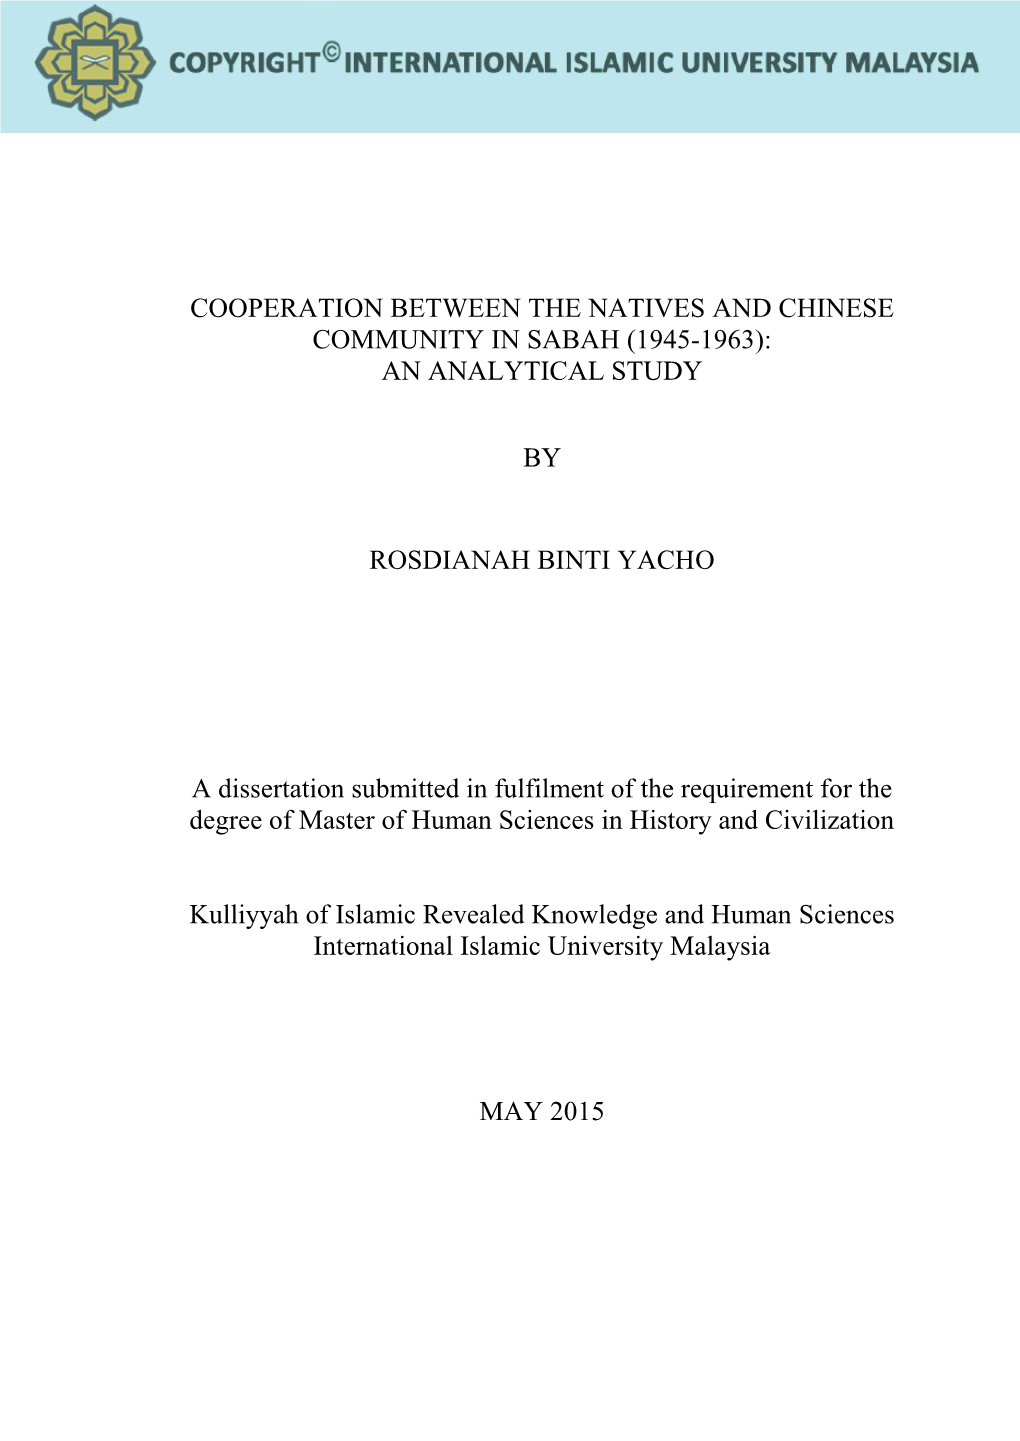 Cooperation Between the Natives and Chinese Community in Sabah (1945-1963): an Analytical Study